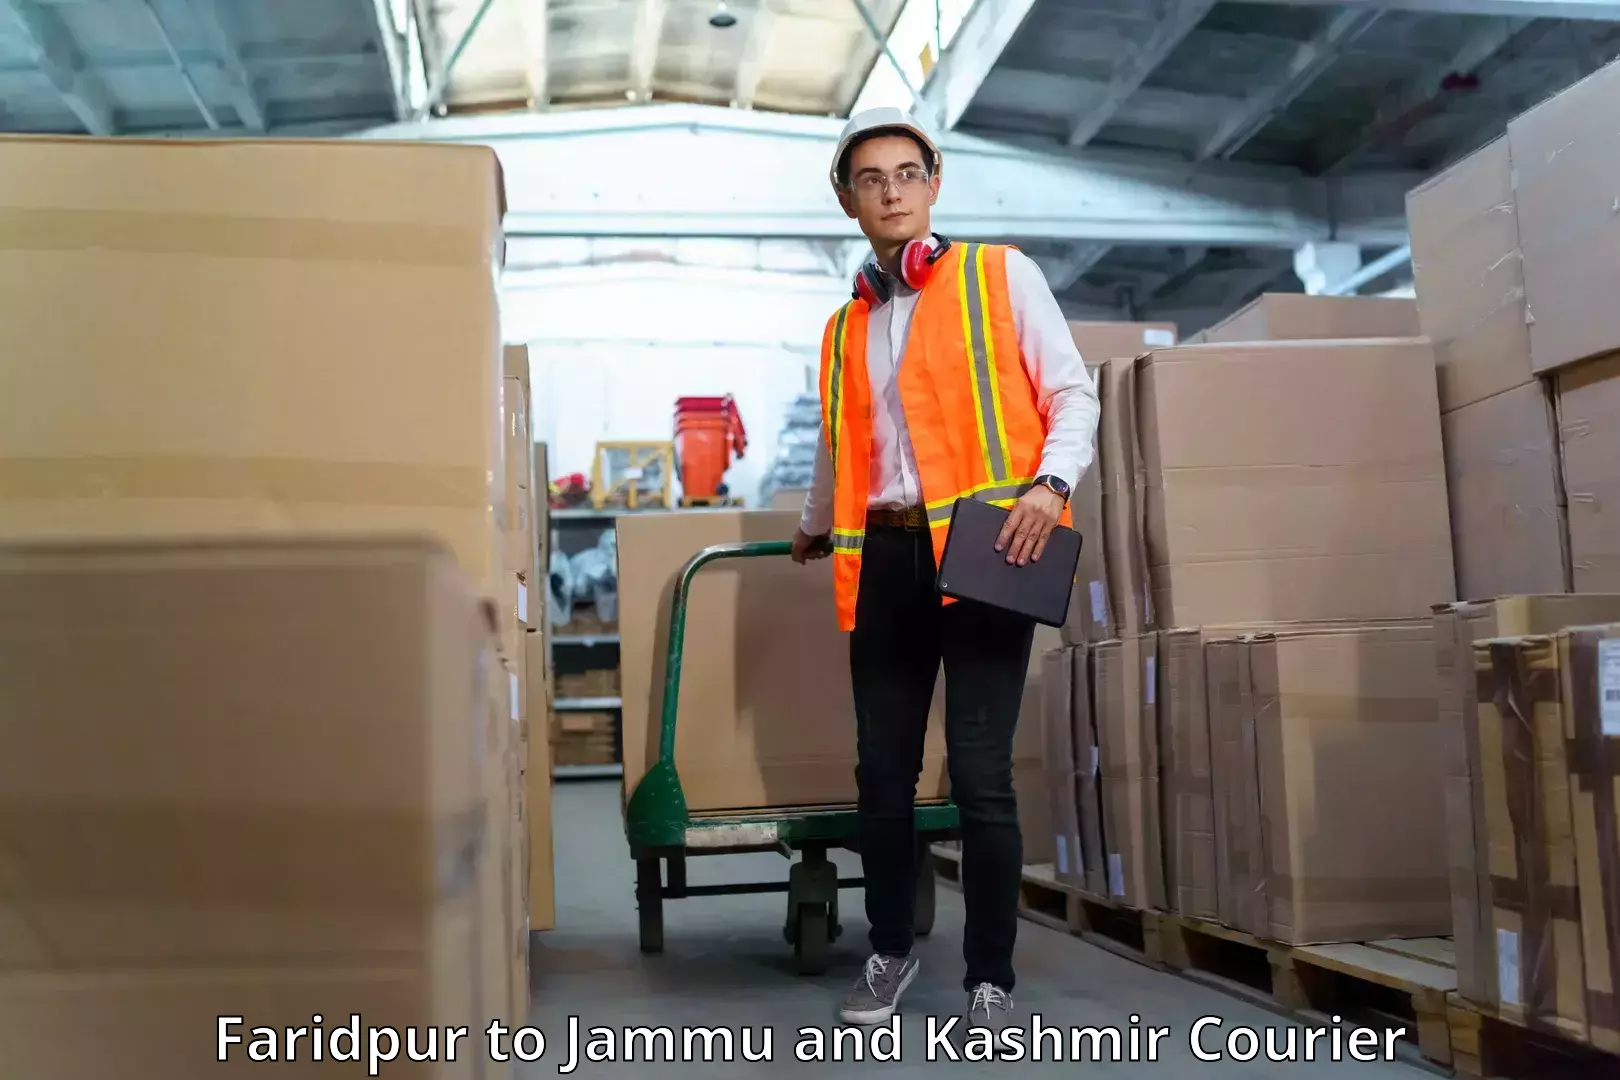 Courier service innovation Faridpur to Jammu and Kashmir